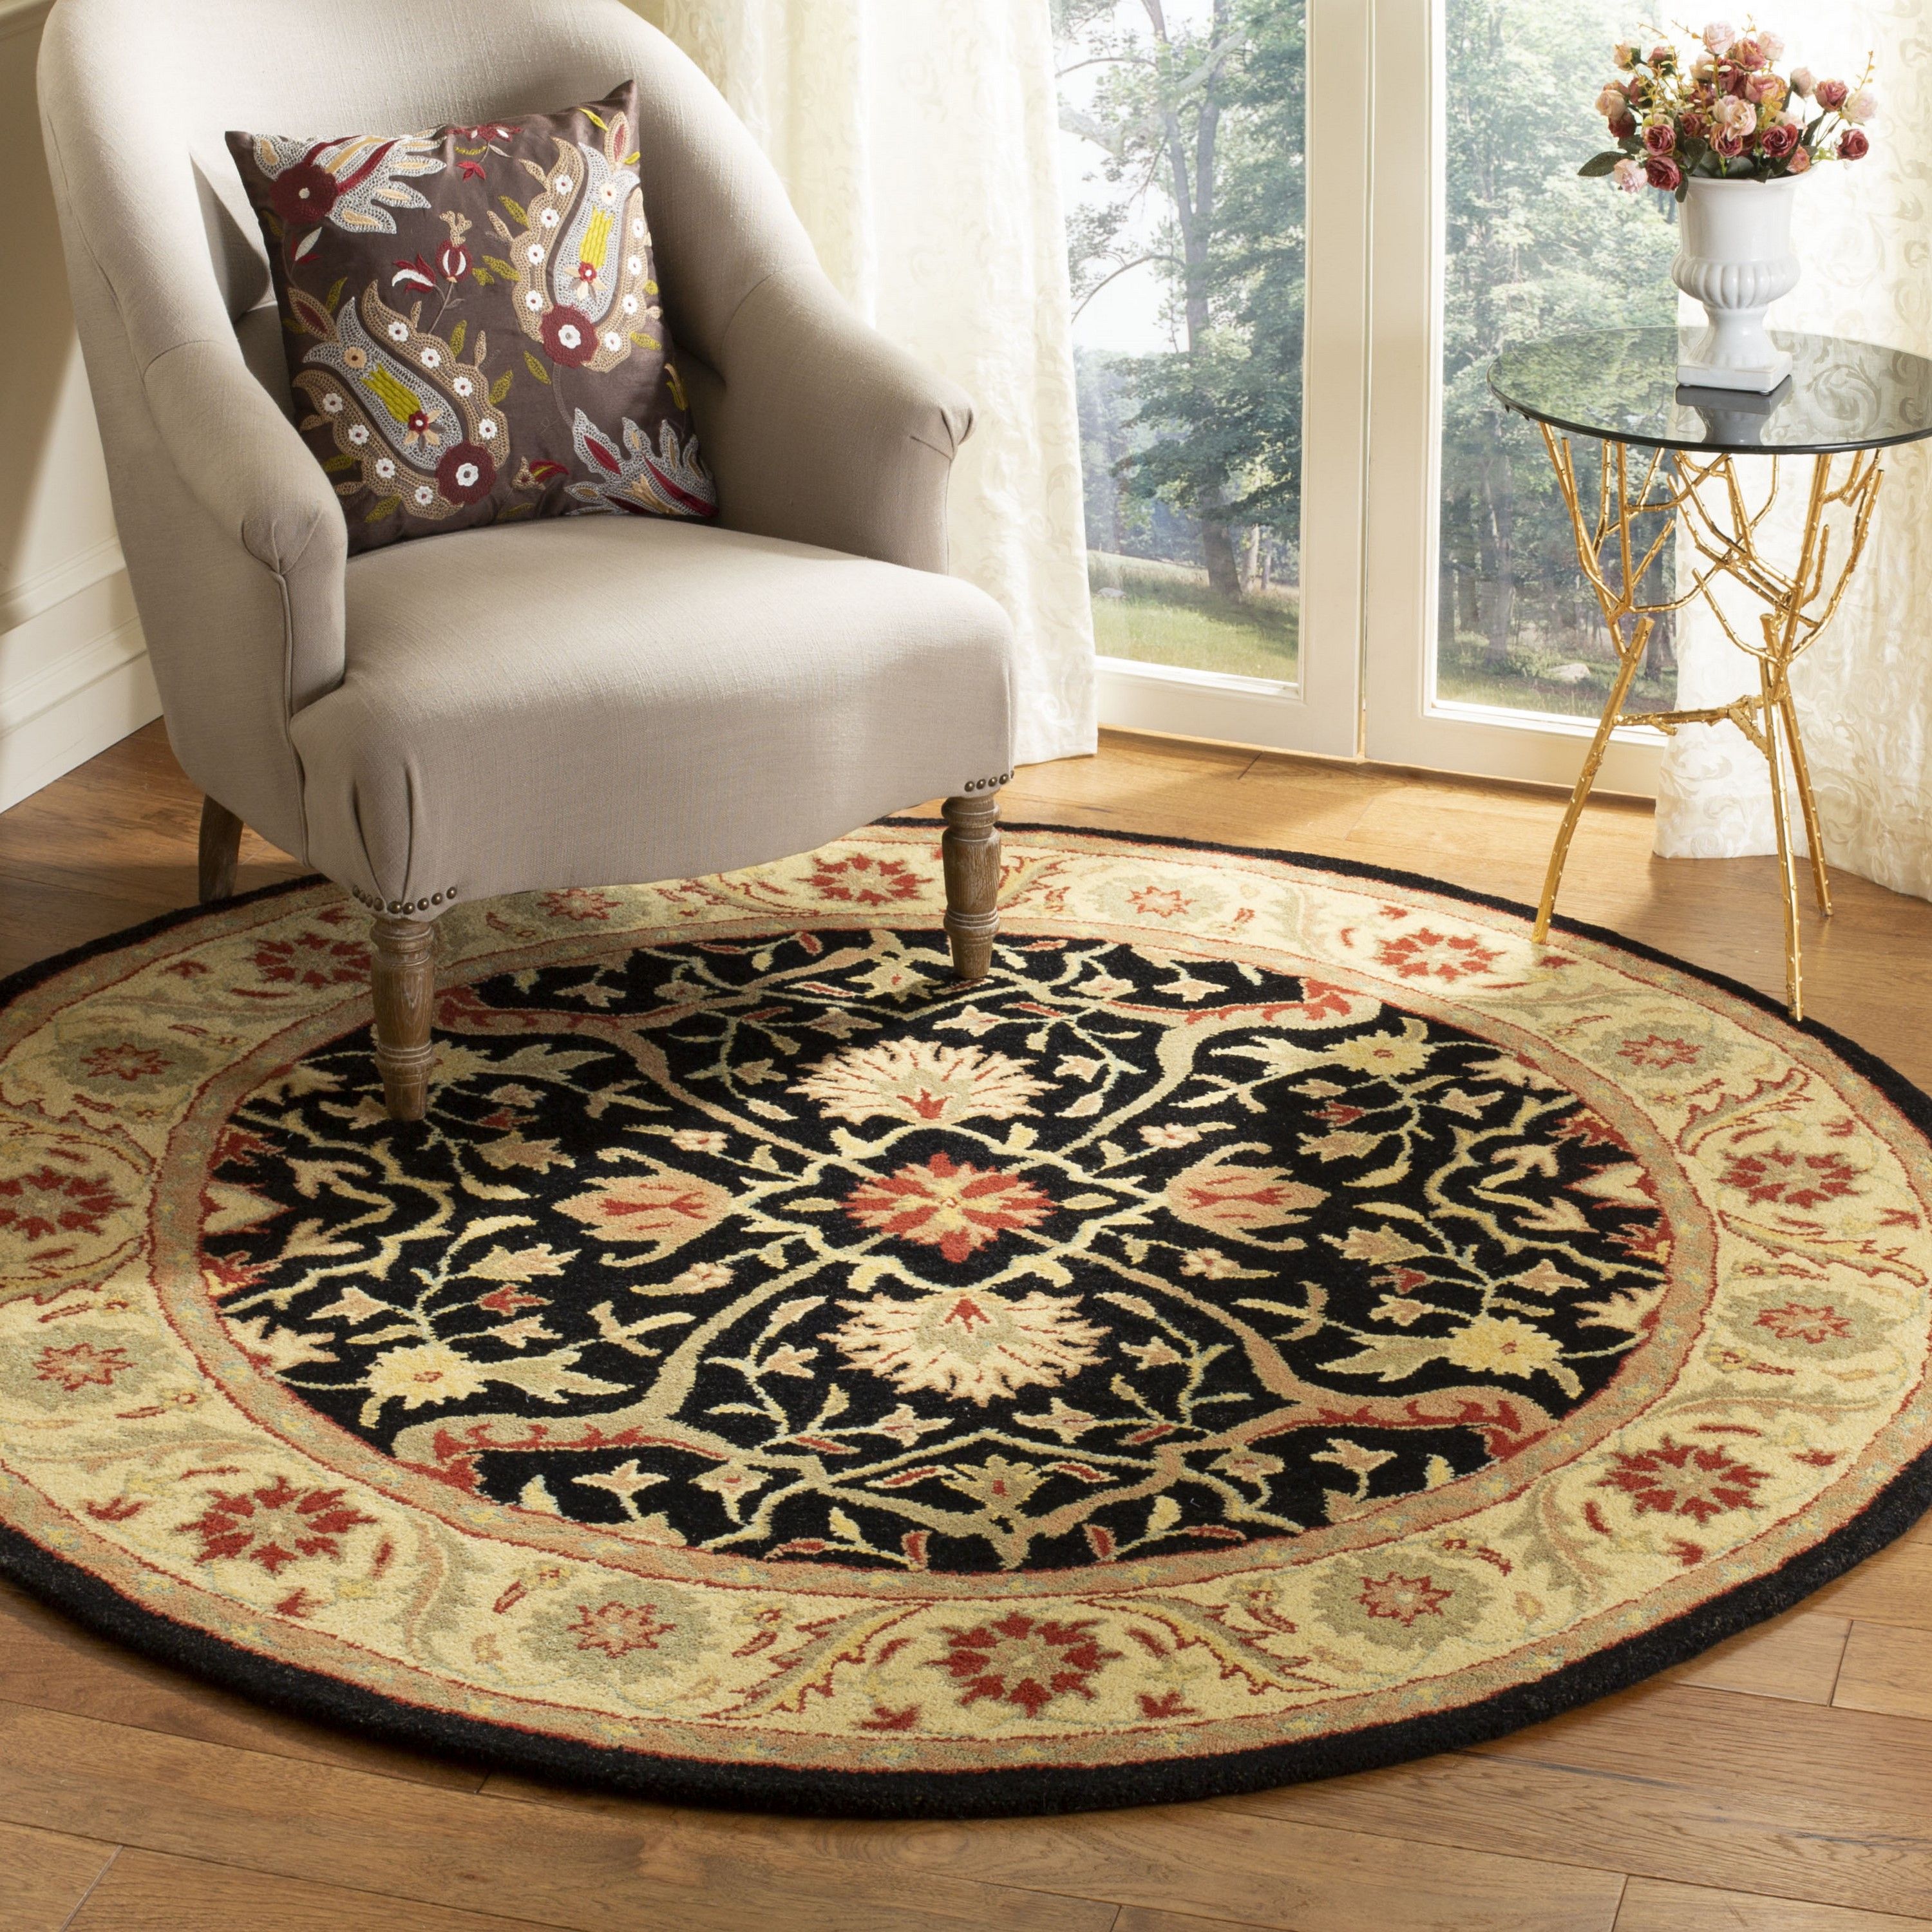 Safavieh 8 X 10 Wool Black Oval Indoor Floral/botanical Vintage Area Rug In  The Rugs Department At Lowes Intended For Botanical Oval Rugs (View 8 of 15)